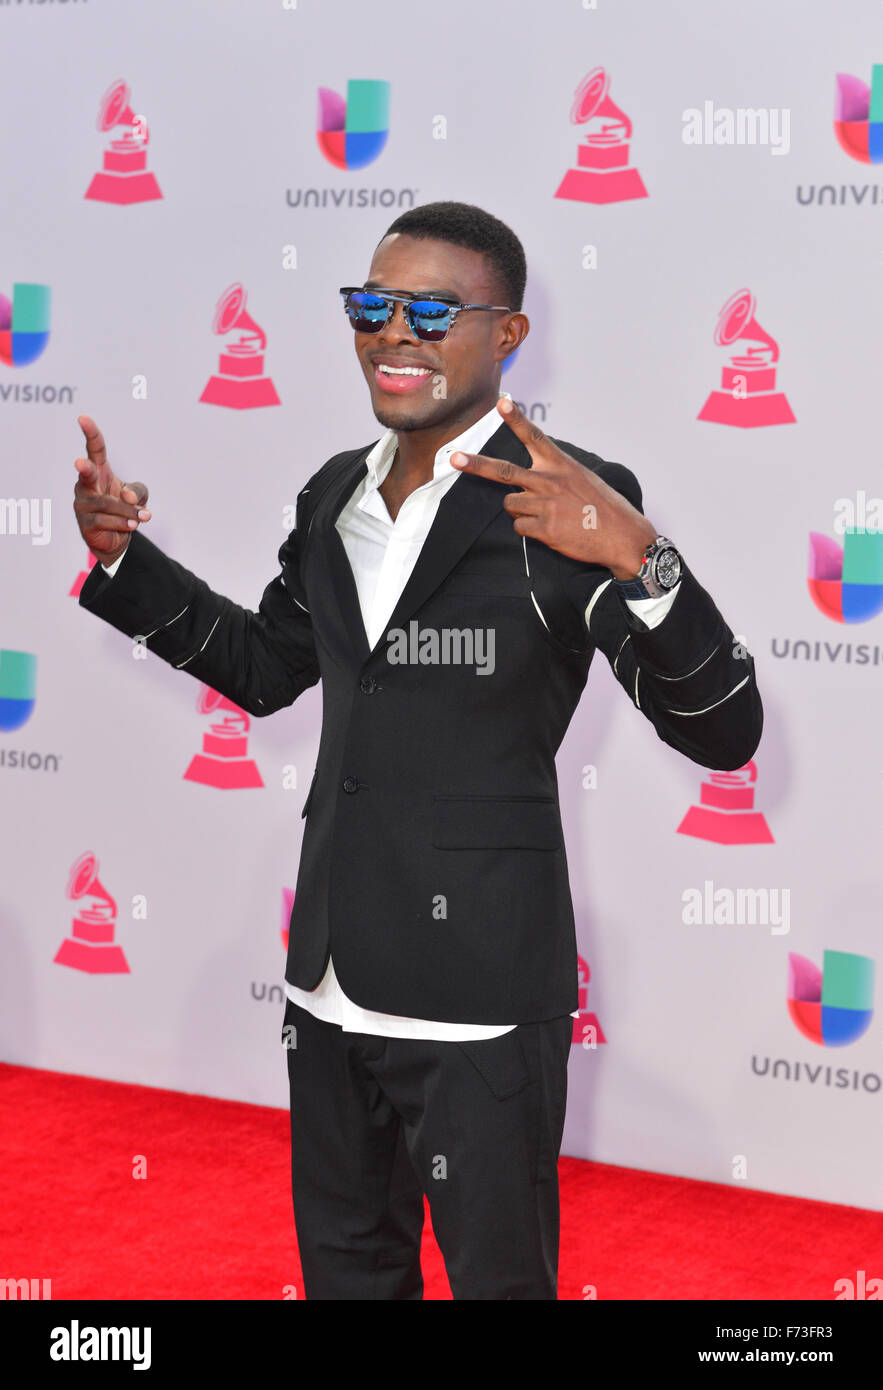 Singer OMI attends the 16th Annual Latin GRAMMY Awards in Las Vegas Stock Photo